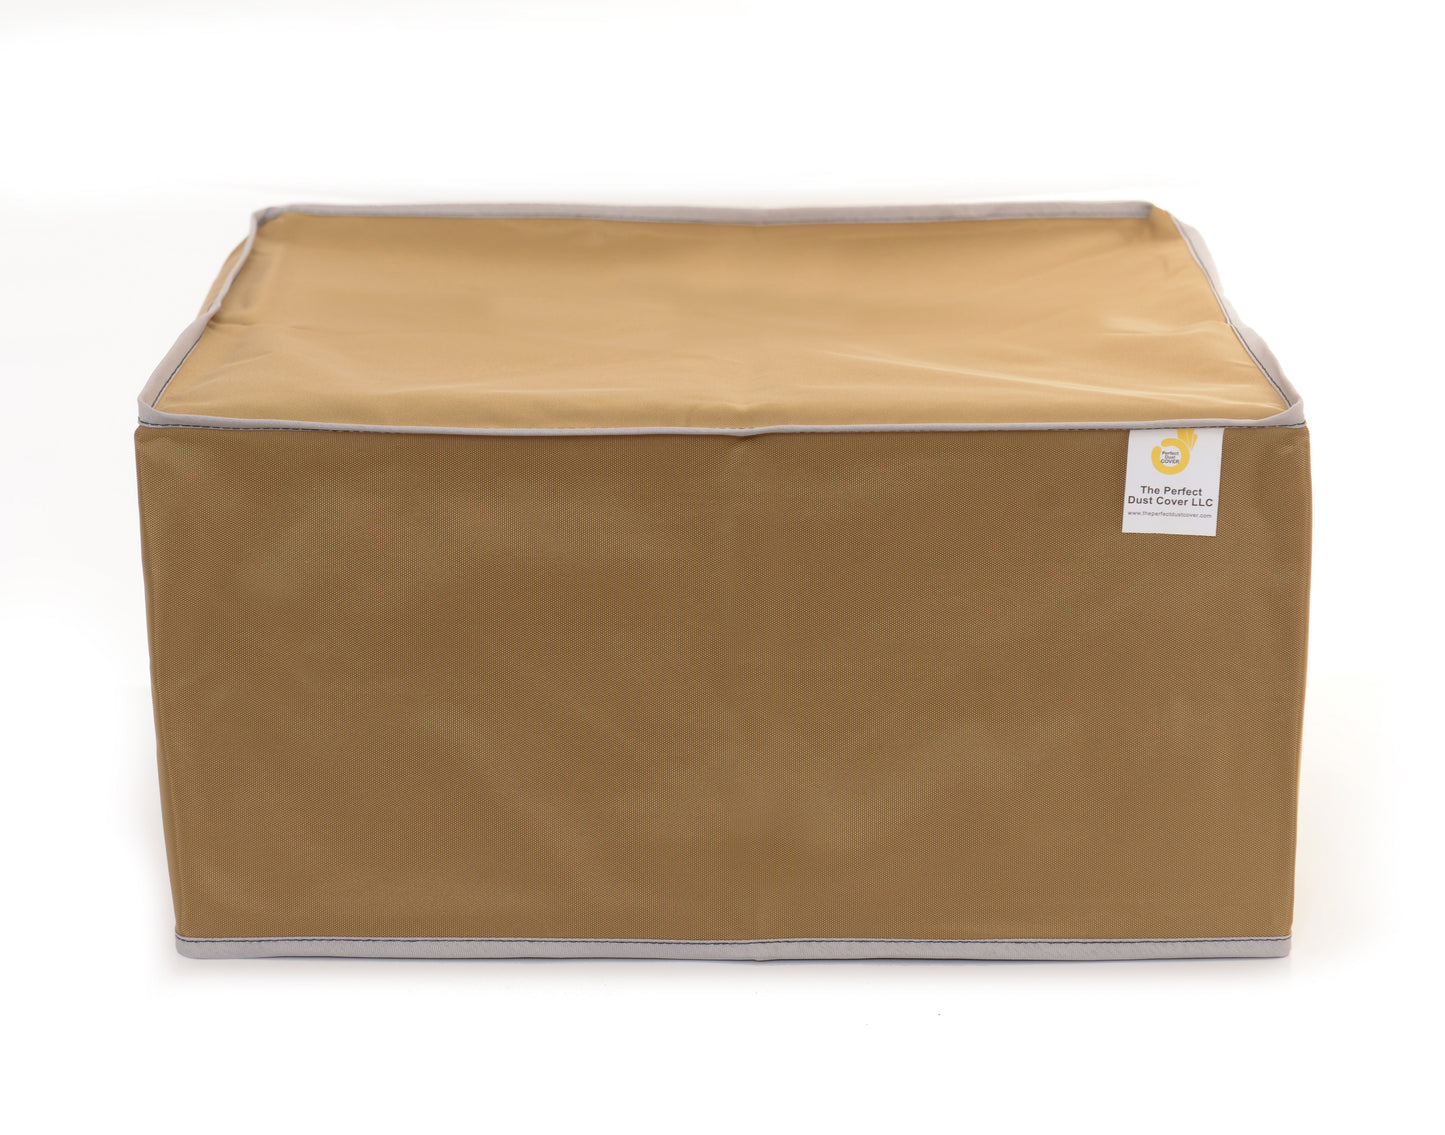 The Perfect Dust Cover, Tan Nylon Cover Compatible with HP LaserJet Pro MFP 4103dw Monochrome Laser Printer, Anti-Static and Waterproof Dust Cover by The Perfect Dust Cover LLC